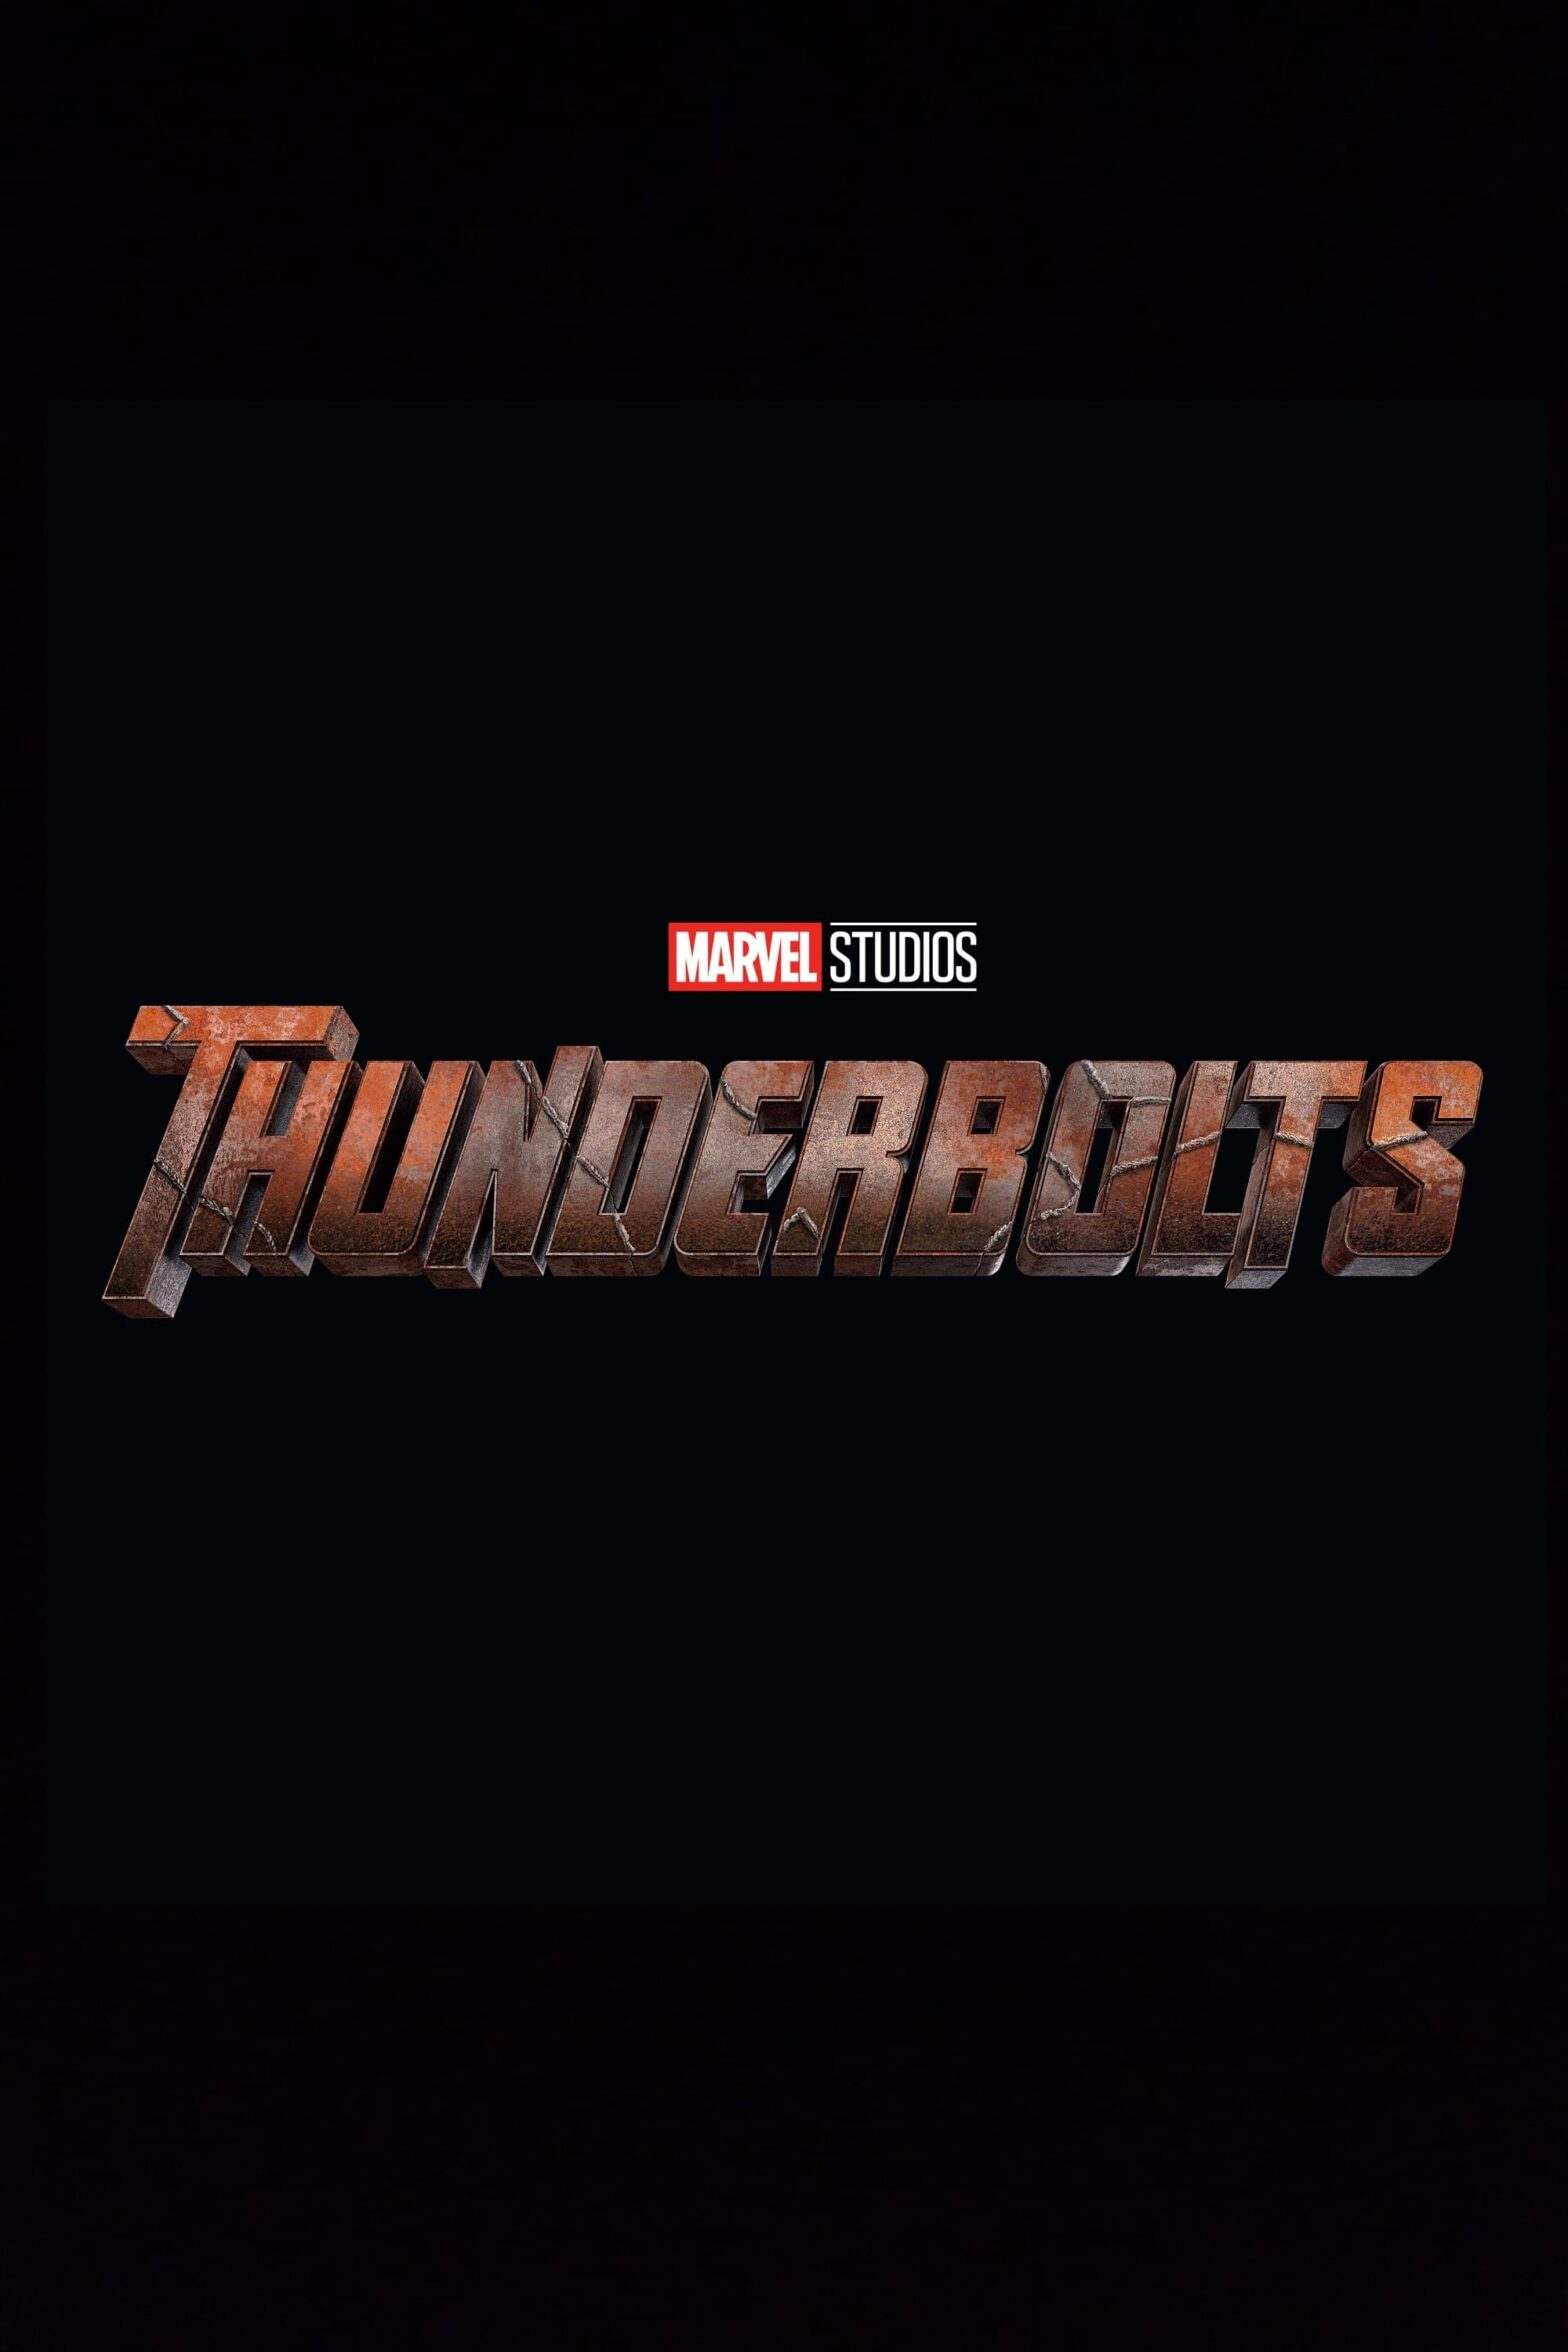 Poster for the movie "Thunderbolts"